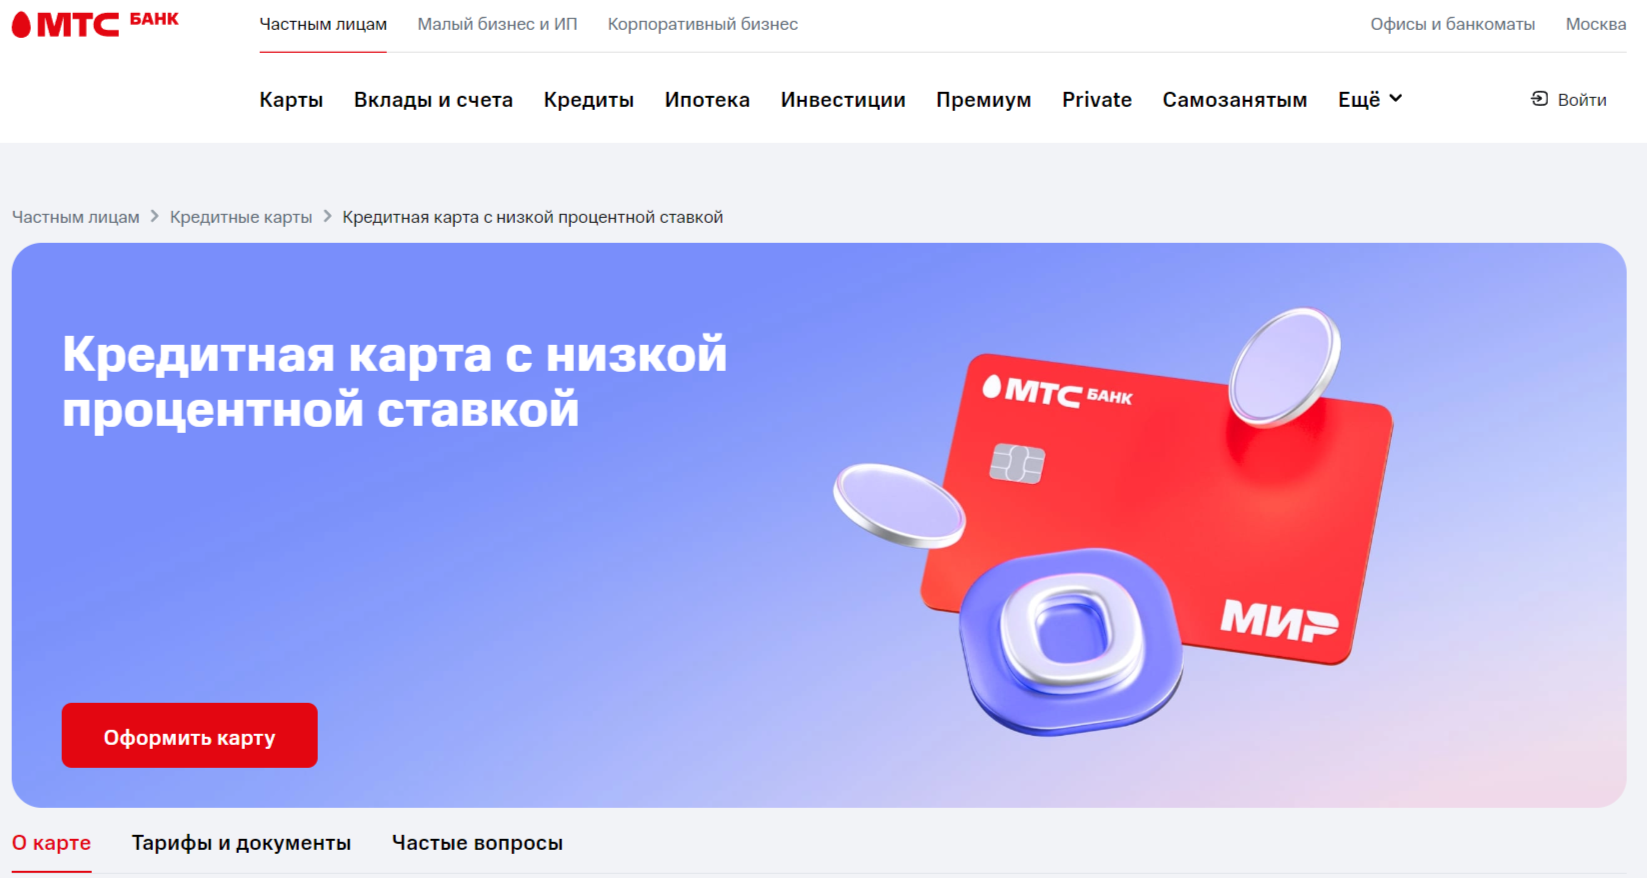 TOP 22 credit cards with temporary registration - registration for citizens of the Russian Federation - Credit, Credit card, Credit history, Cards, Bank card, Tinkoff Bank, Sberbank, Alpha, Alfa Bank, VTB Bank, Mts-Bank, Company Blogs, Longpost